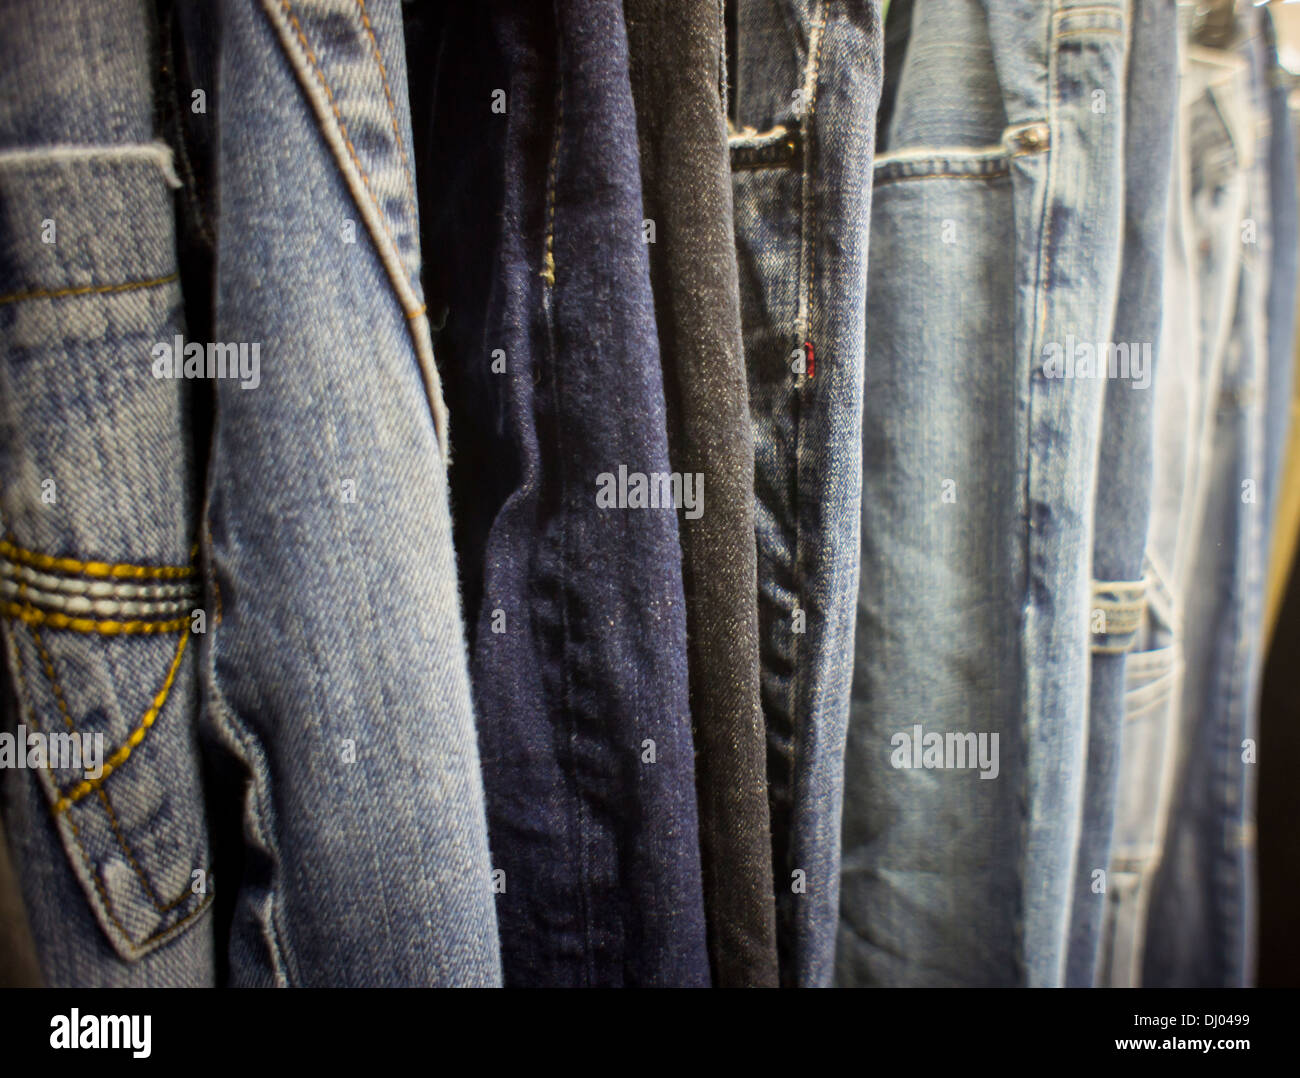 Used Jeans High Resolution Stock Photography and Images - Alamy